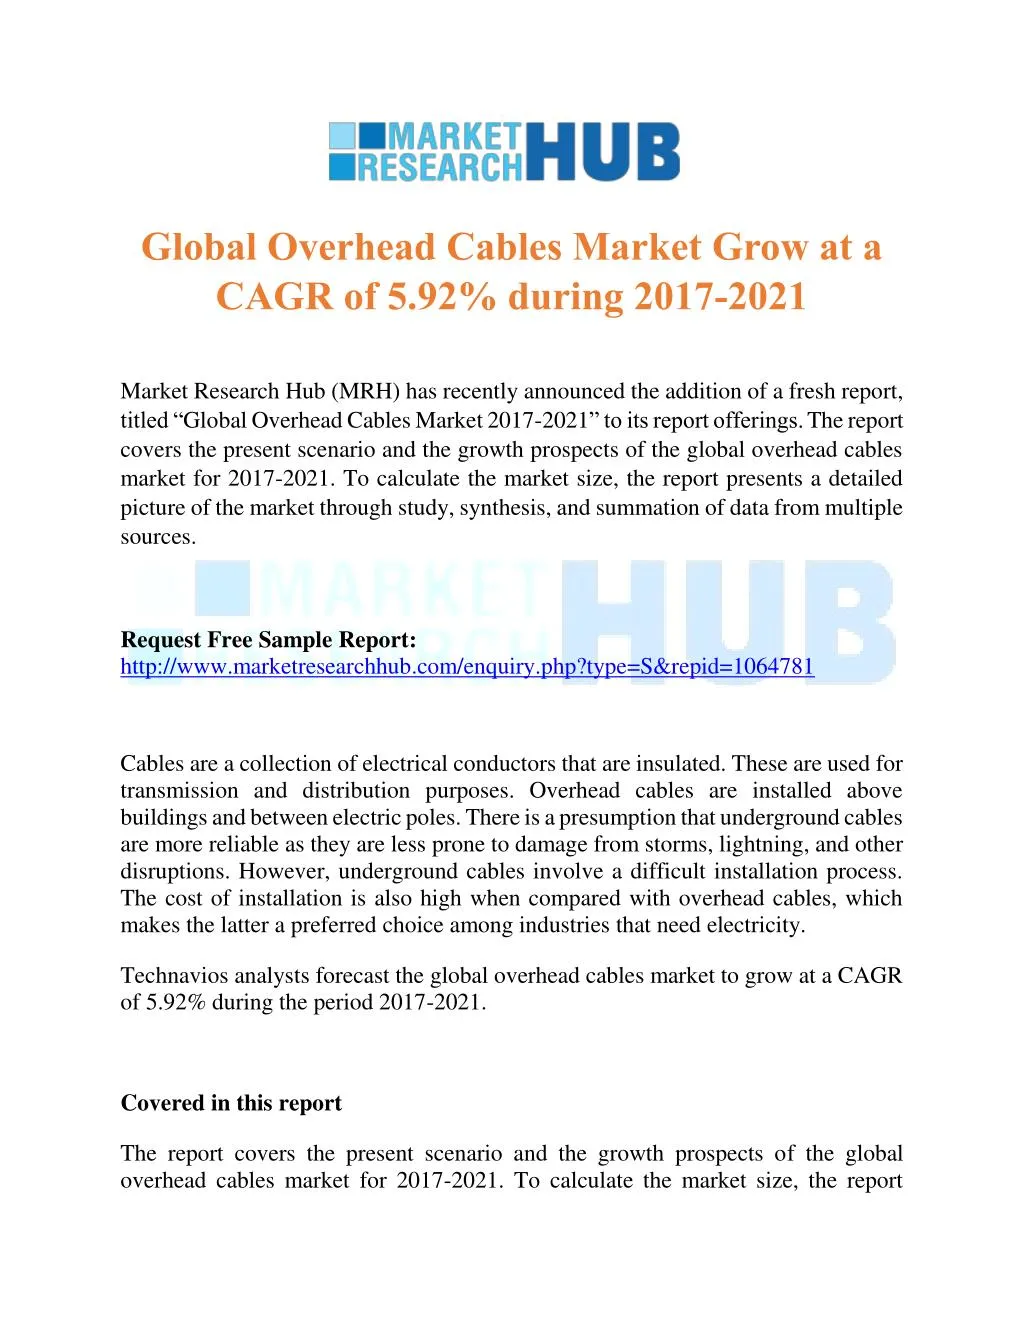 global overhead cables market grow at a cagr